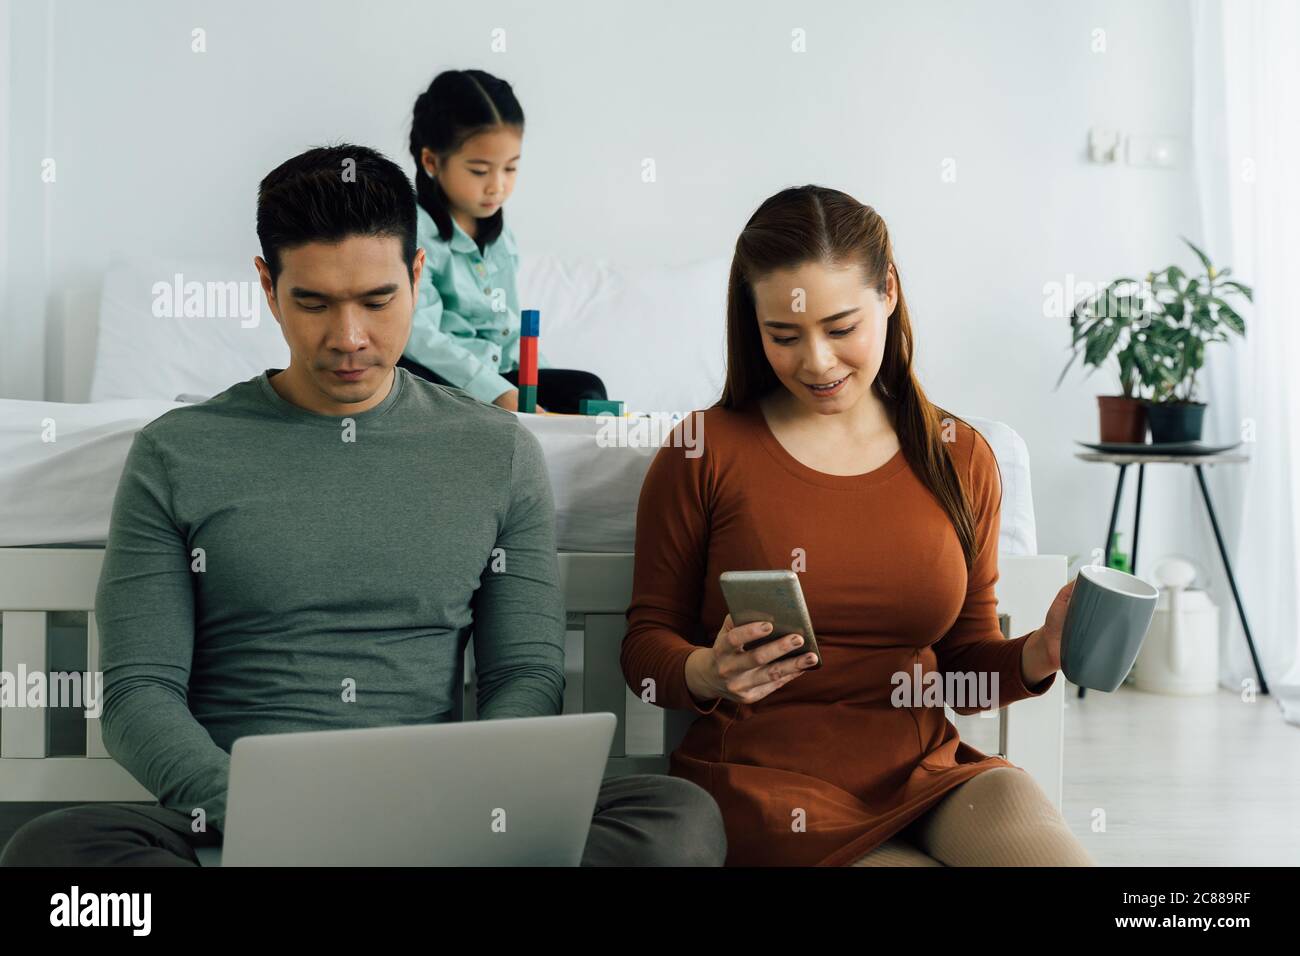 Cheerful couple sitting with computer and smartphone as young girl plays alone in the background Stock Photo